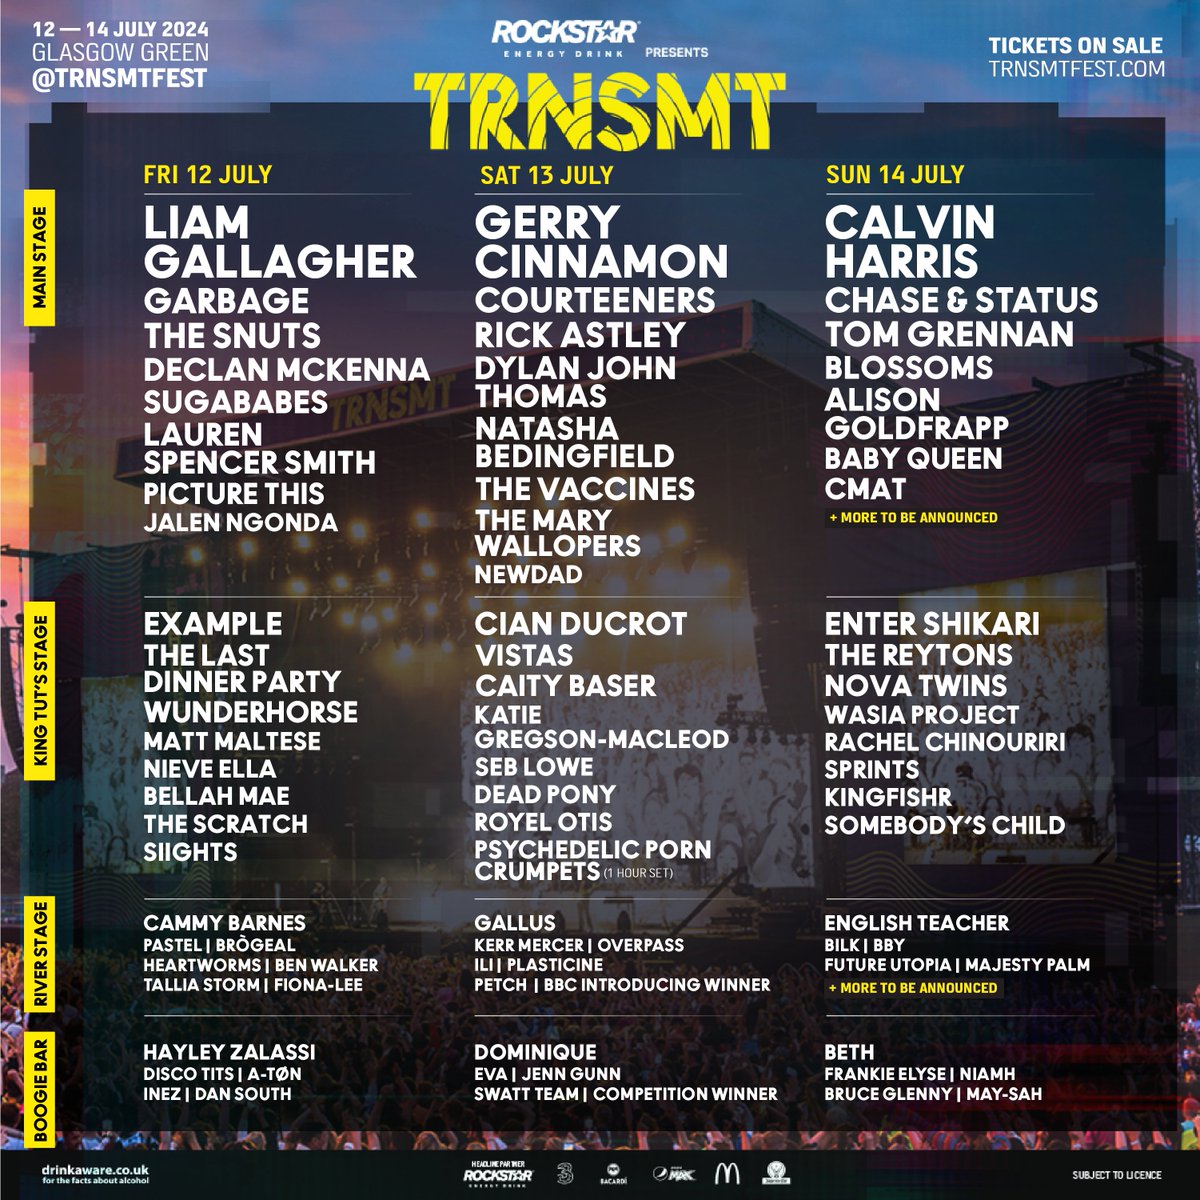 Rockstar Energy presents TRNSMT 2024! Not one you'll want to miss...final artists coming soon👀 Tickets ~ trnsmt.co/tickets #RockstarEnergyXTRNSMT